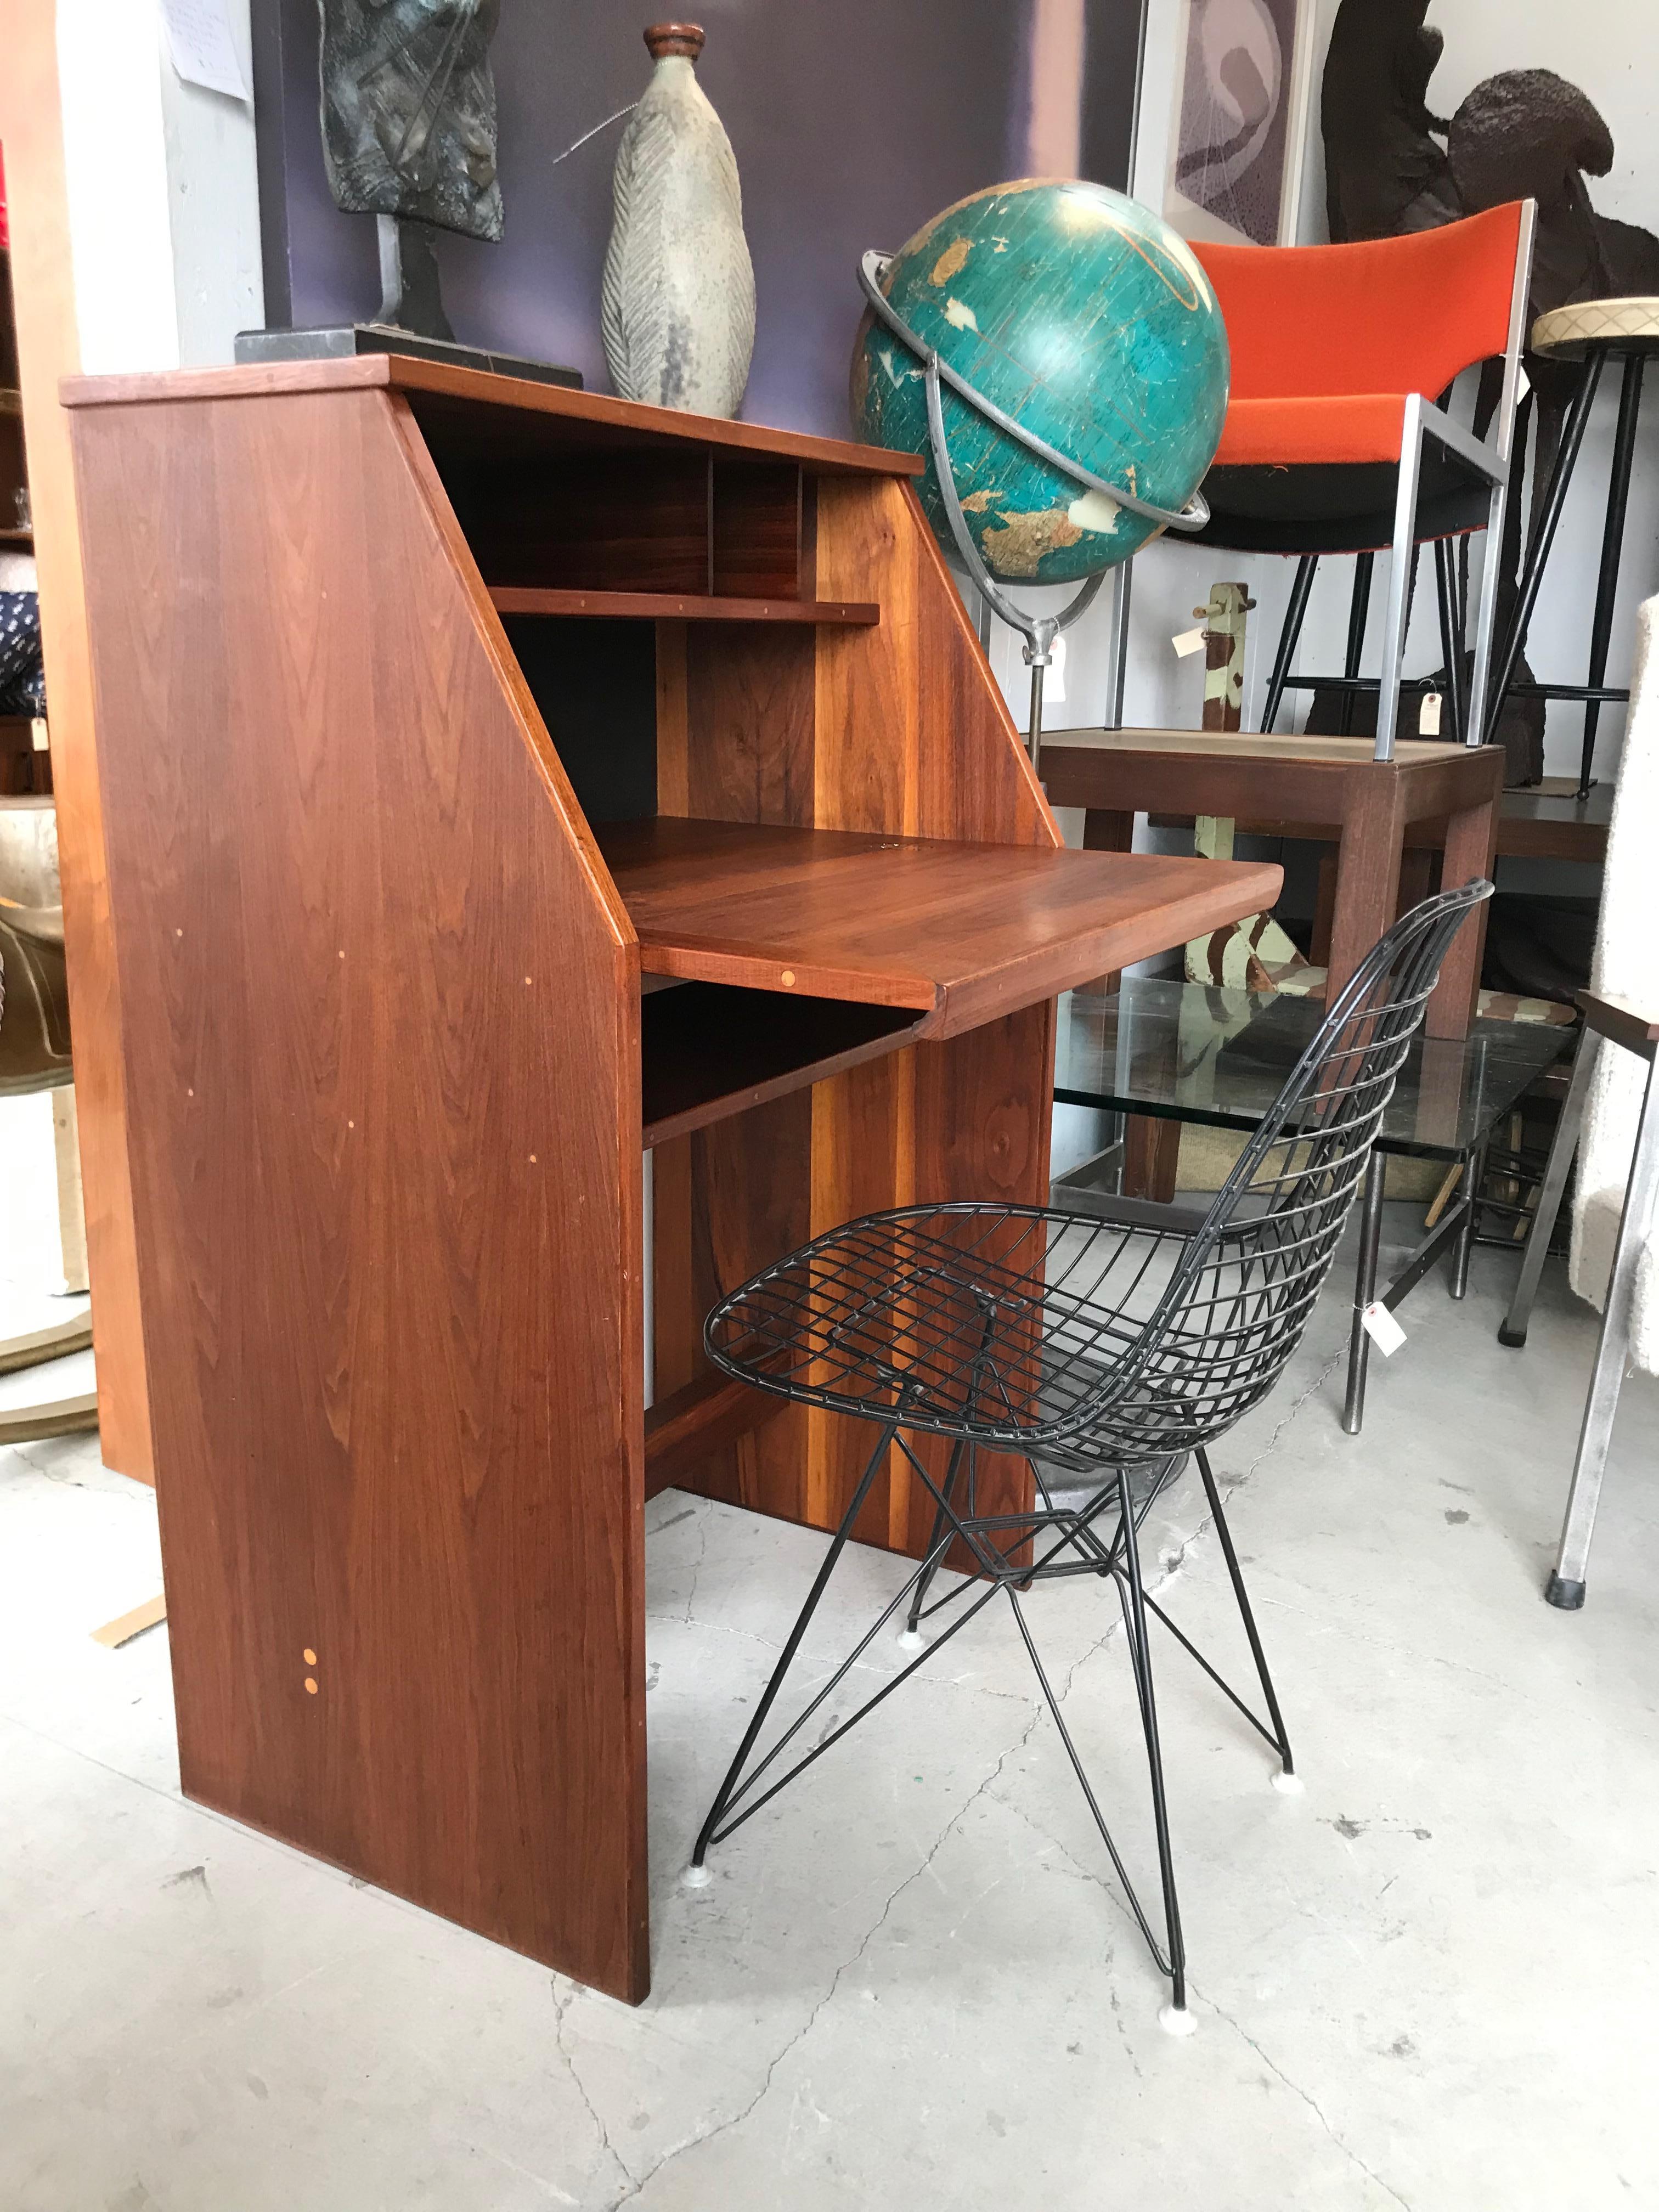 Nice modernist design.
It appears to be a custom one-off.
Plywood with walnut veneer and trim with solid walnut base support. 
Sculpted walnut pull.
Nice storage compartments with bottom shelf. 
Original vintage condition with a nice